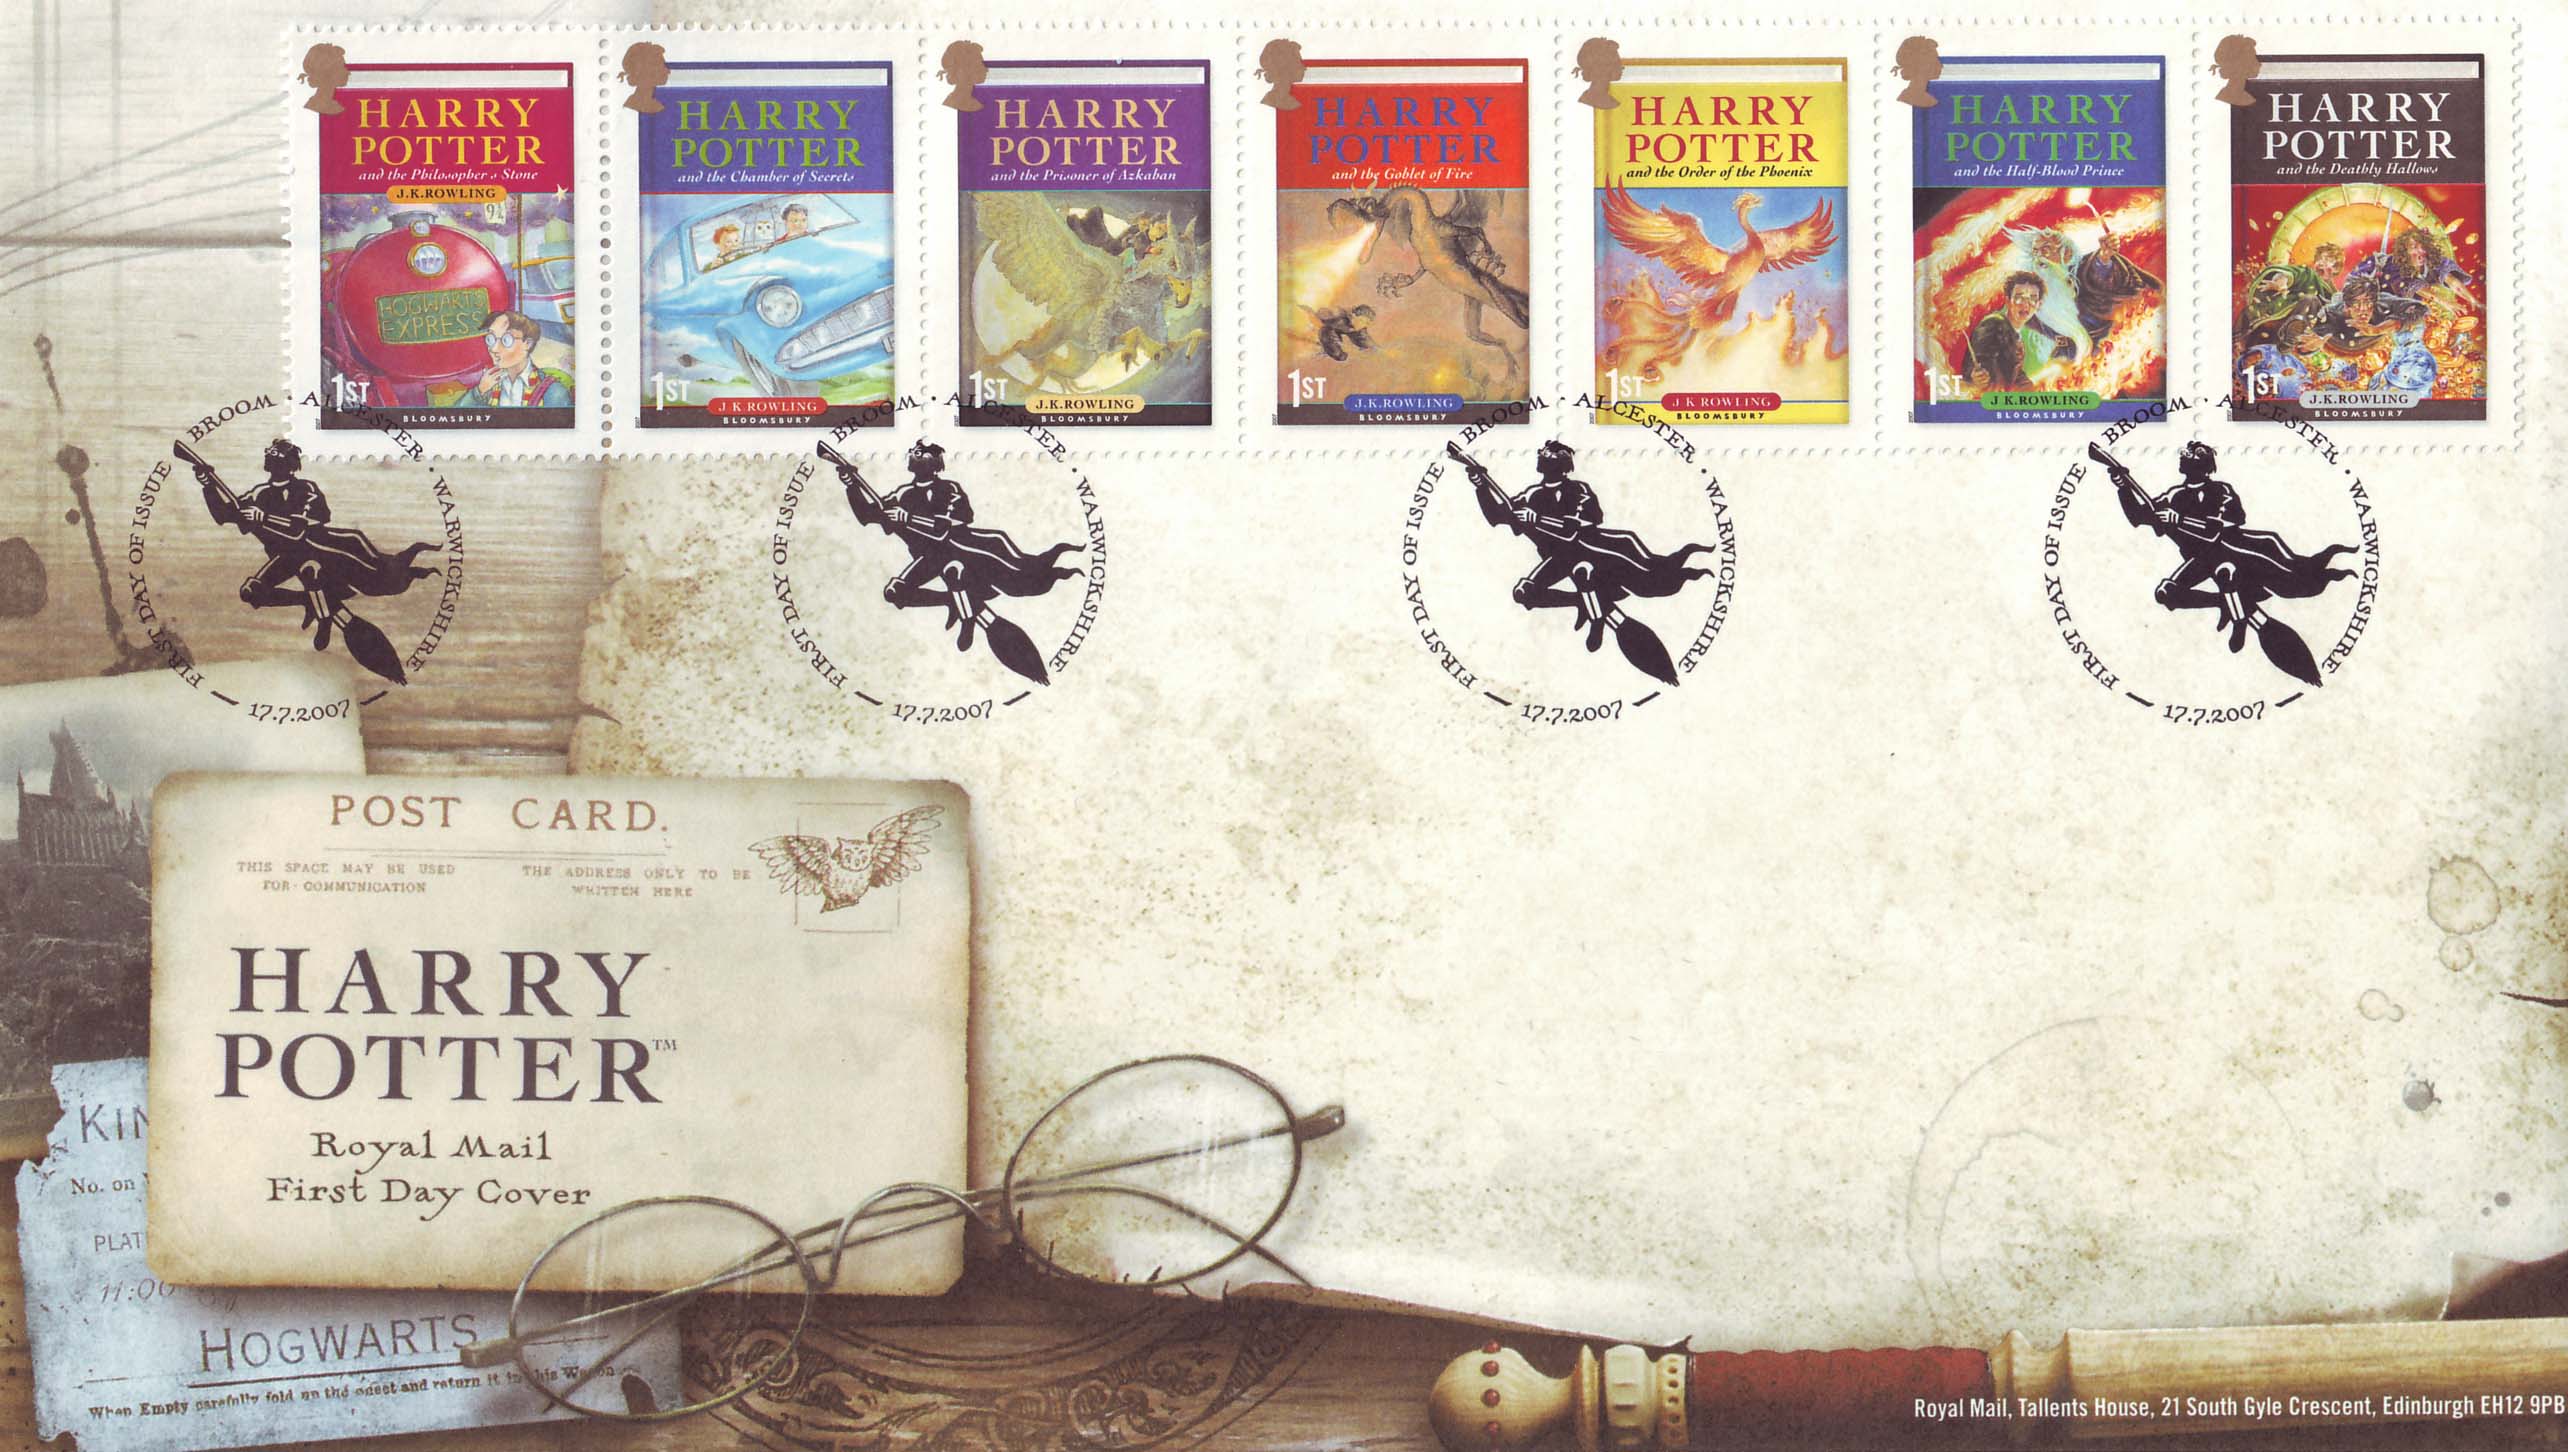 Harry Potter: Royal Mail to Release Harry Potter Commemorative Stamps 